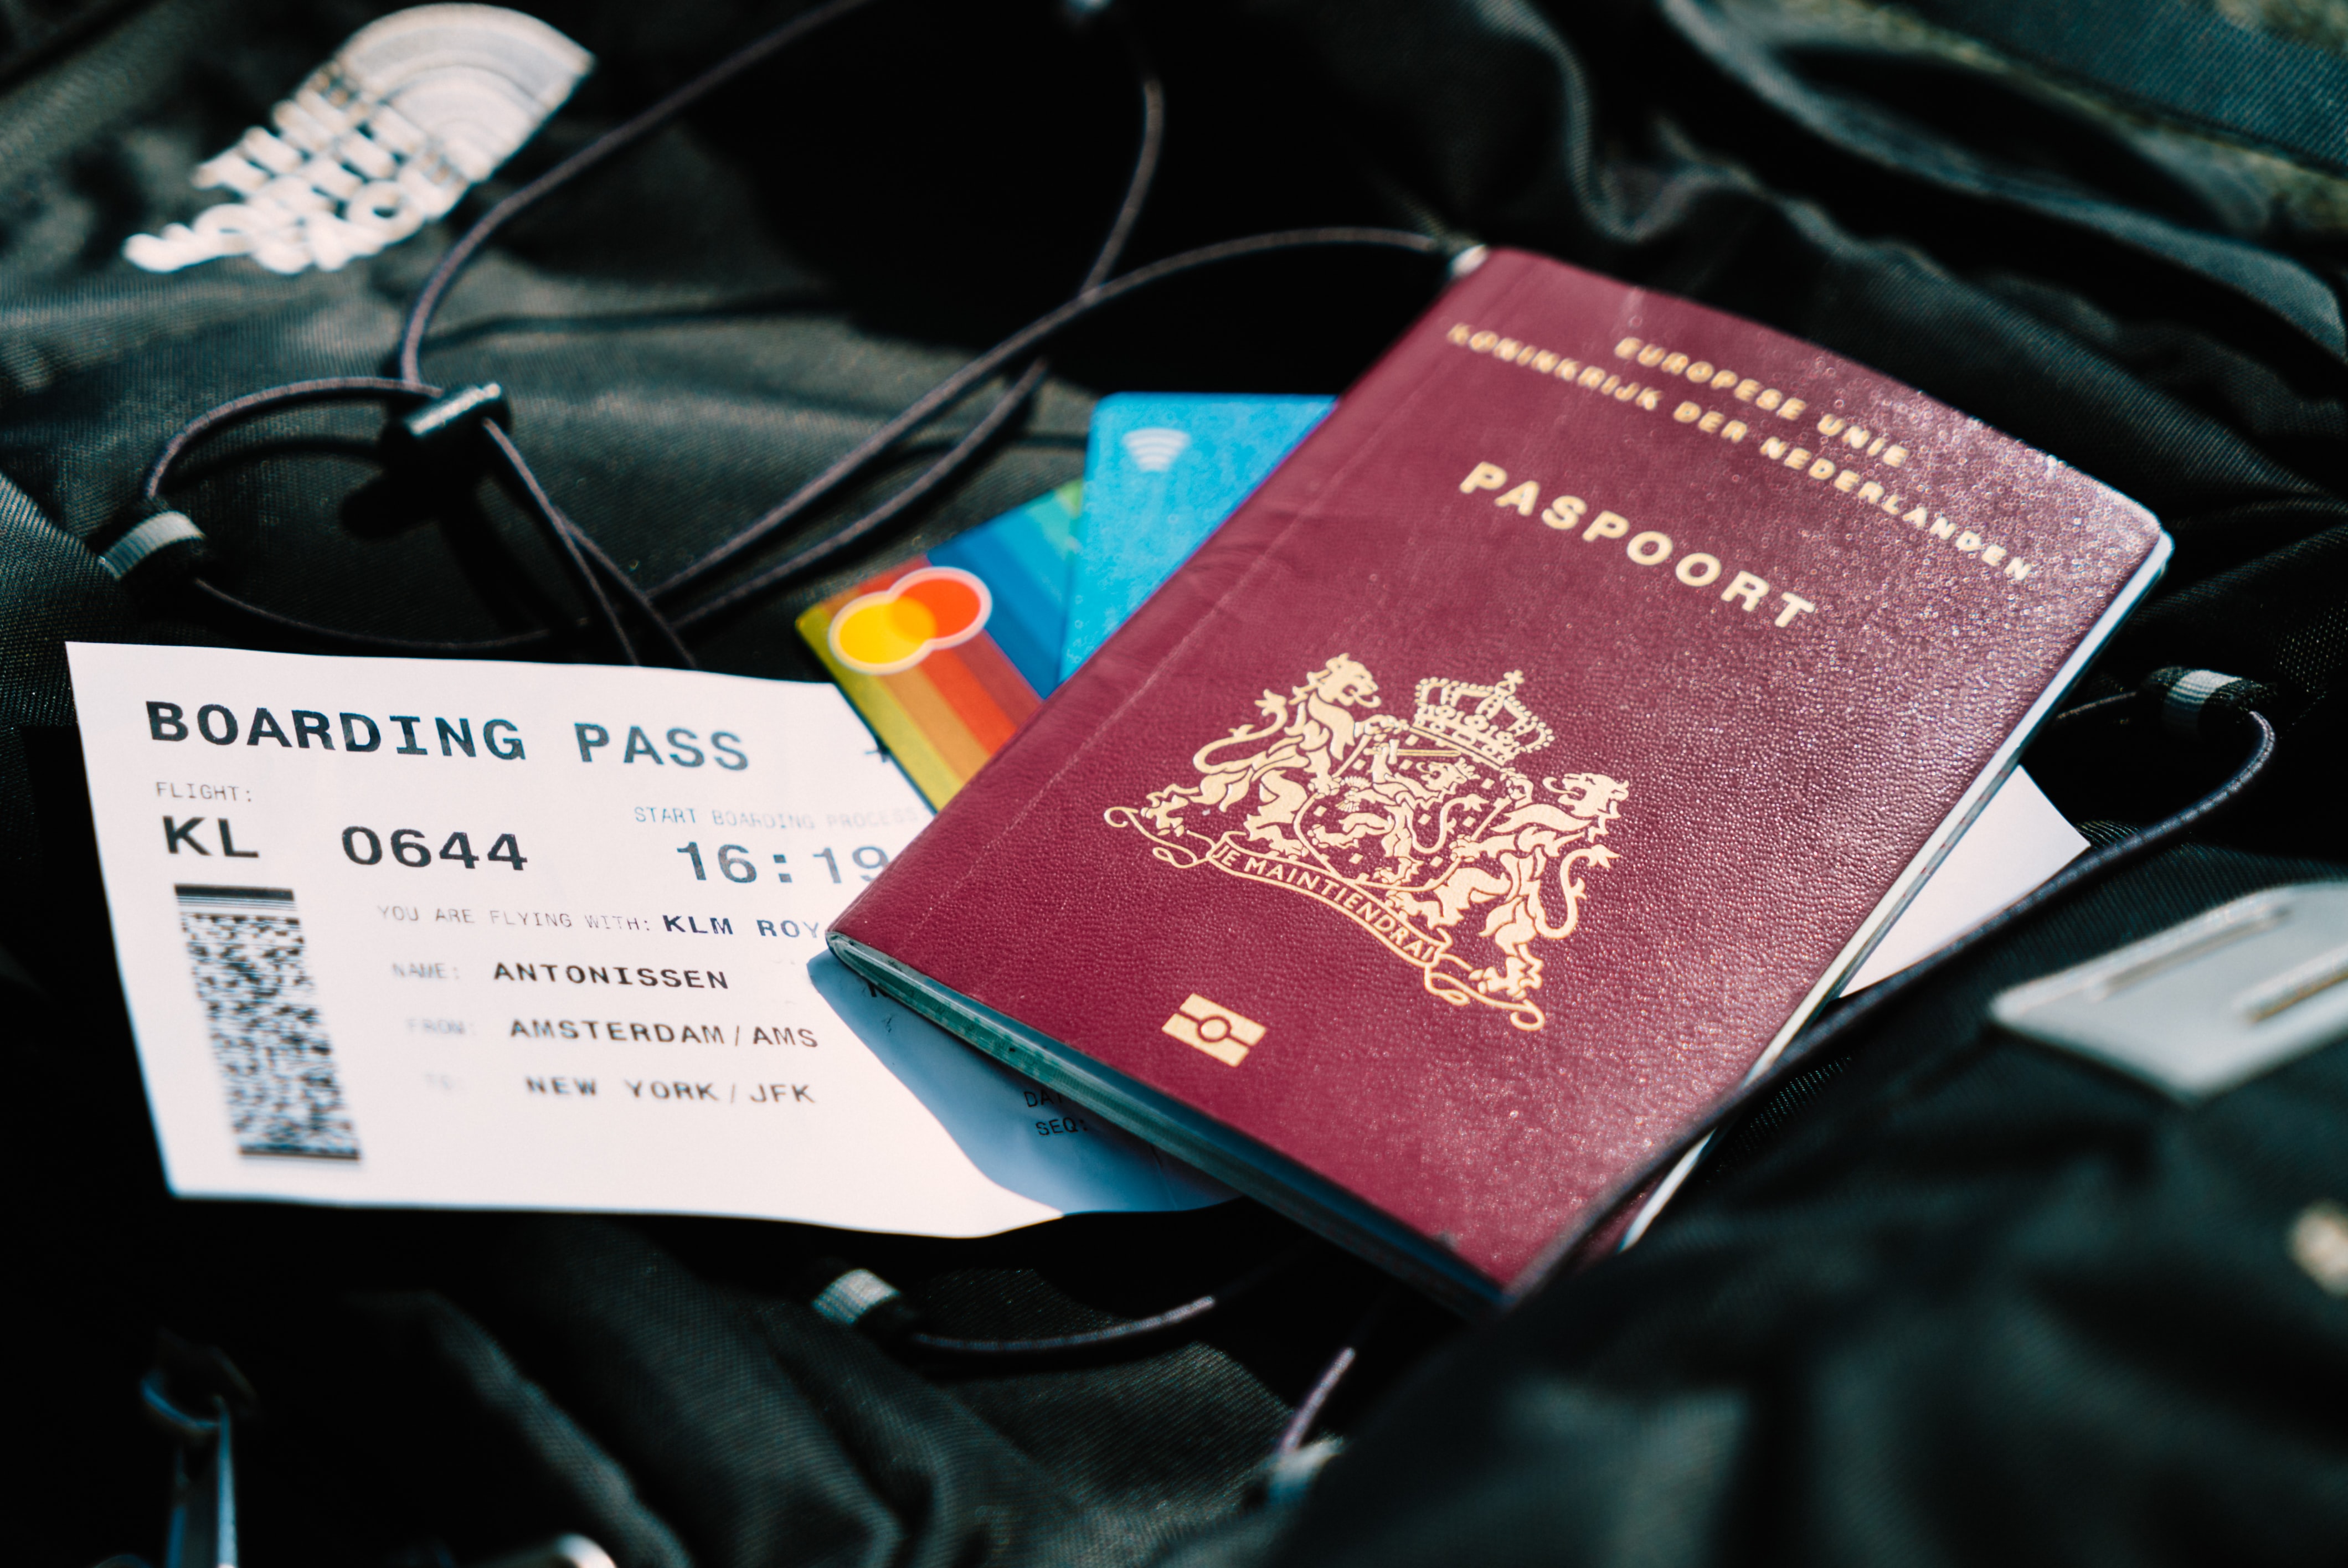 Travel documents on a black backpack